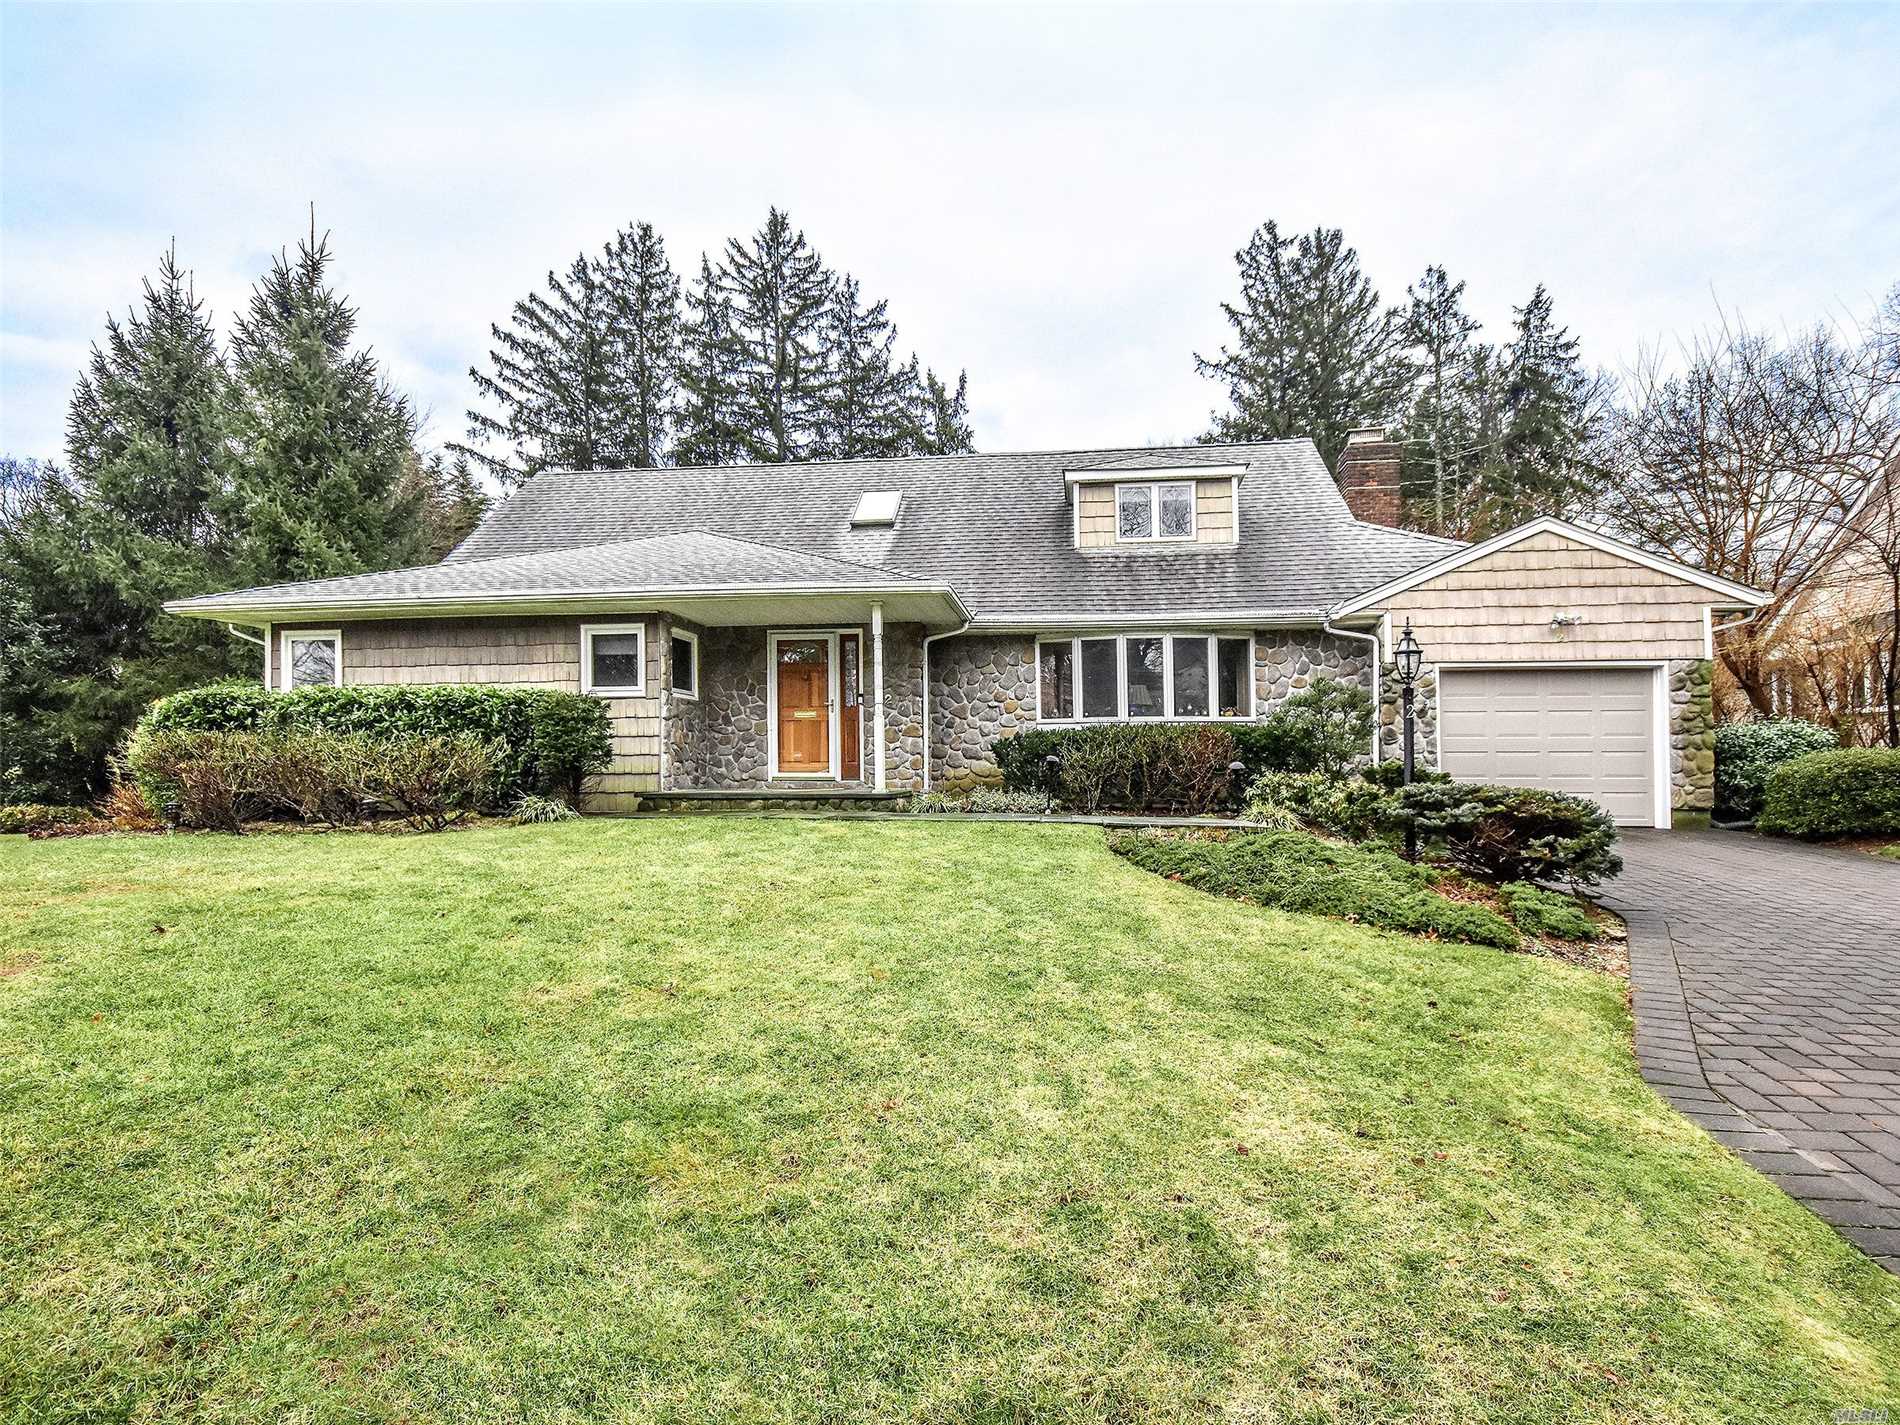 2, 300 Sf. Lake Success Expanded Ranch On Shy 1/3 Acre W/3Br & 2.5 Baths. First Flr Has Lg Foyer W/Skylight, Lr Fdr New Eik, Family Rm W/Frpl & Master Br/Bth With Radiant Heat & Walk In Closets. 2nd Flr Has Two Br & Bth , Generator, Heated Driveway W/Pavers, Hardwood Fl., Village Of Lake Success Club. Close To All, Train. Expressway And Shopping.